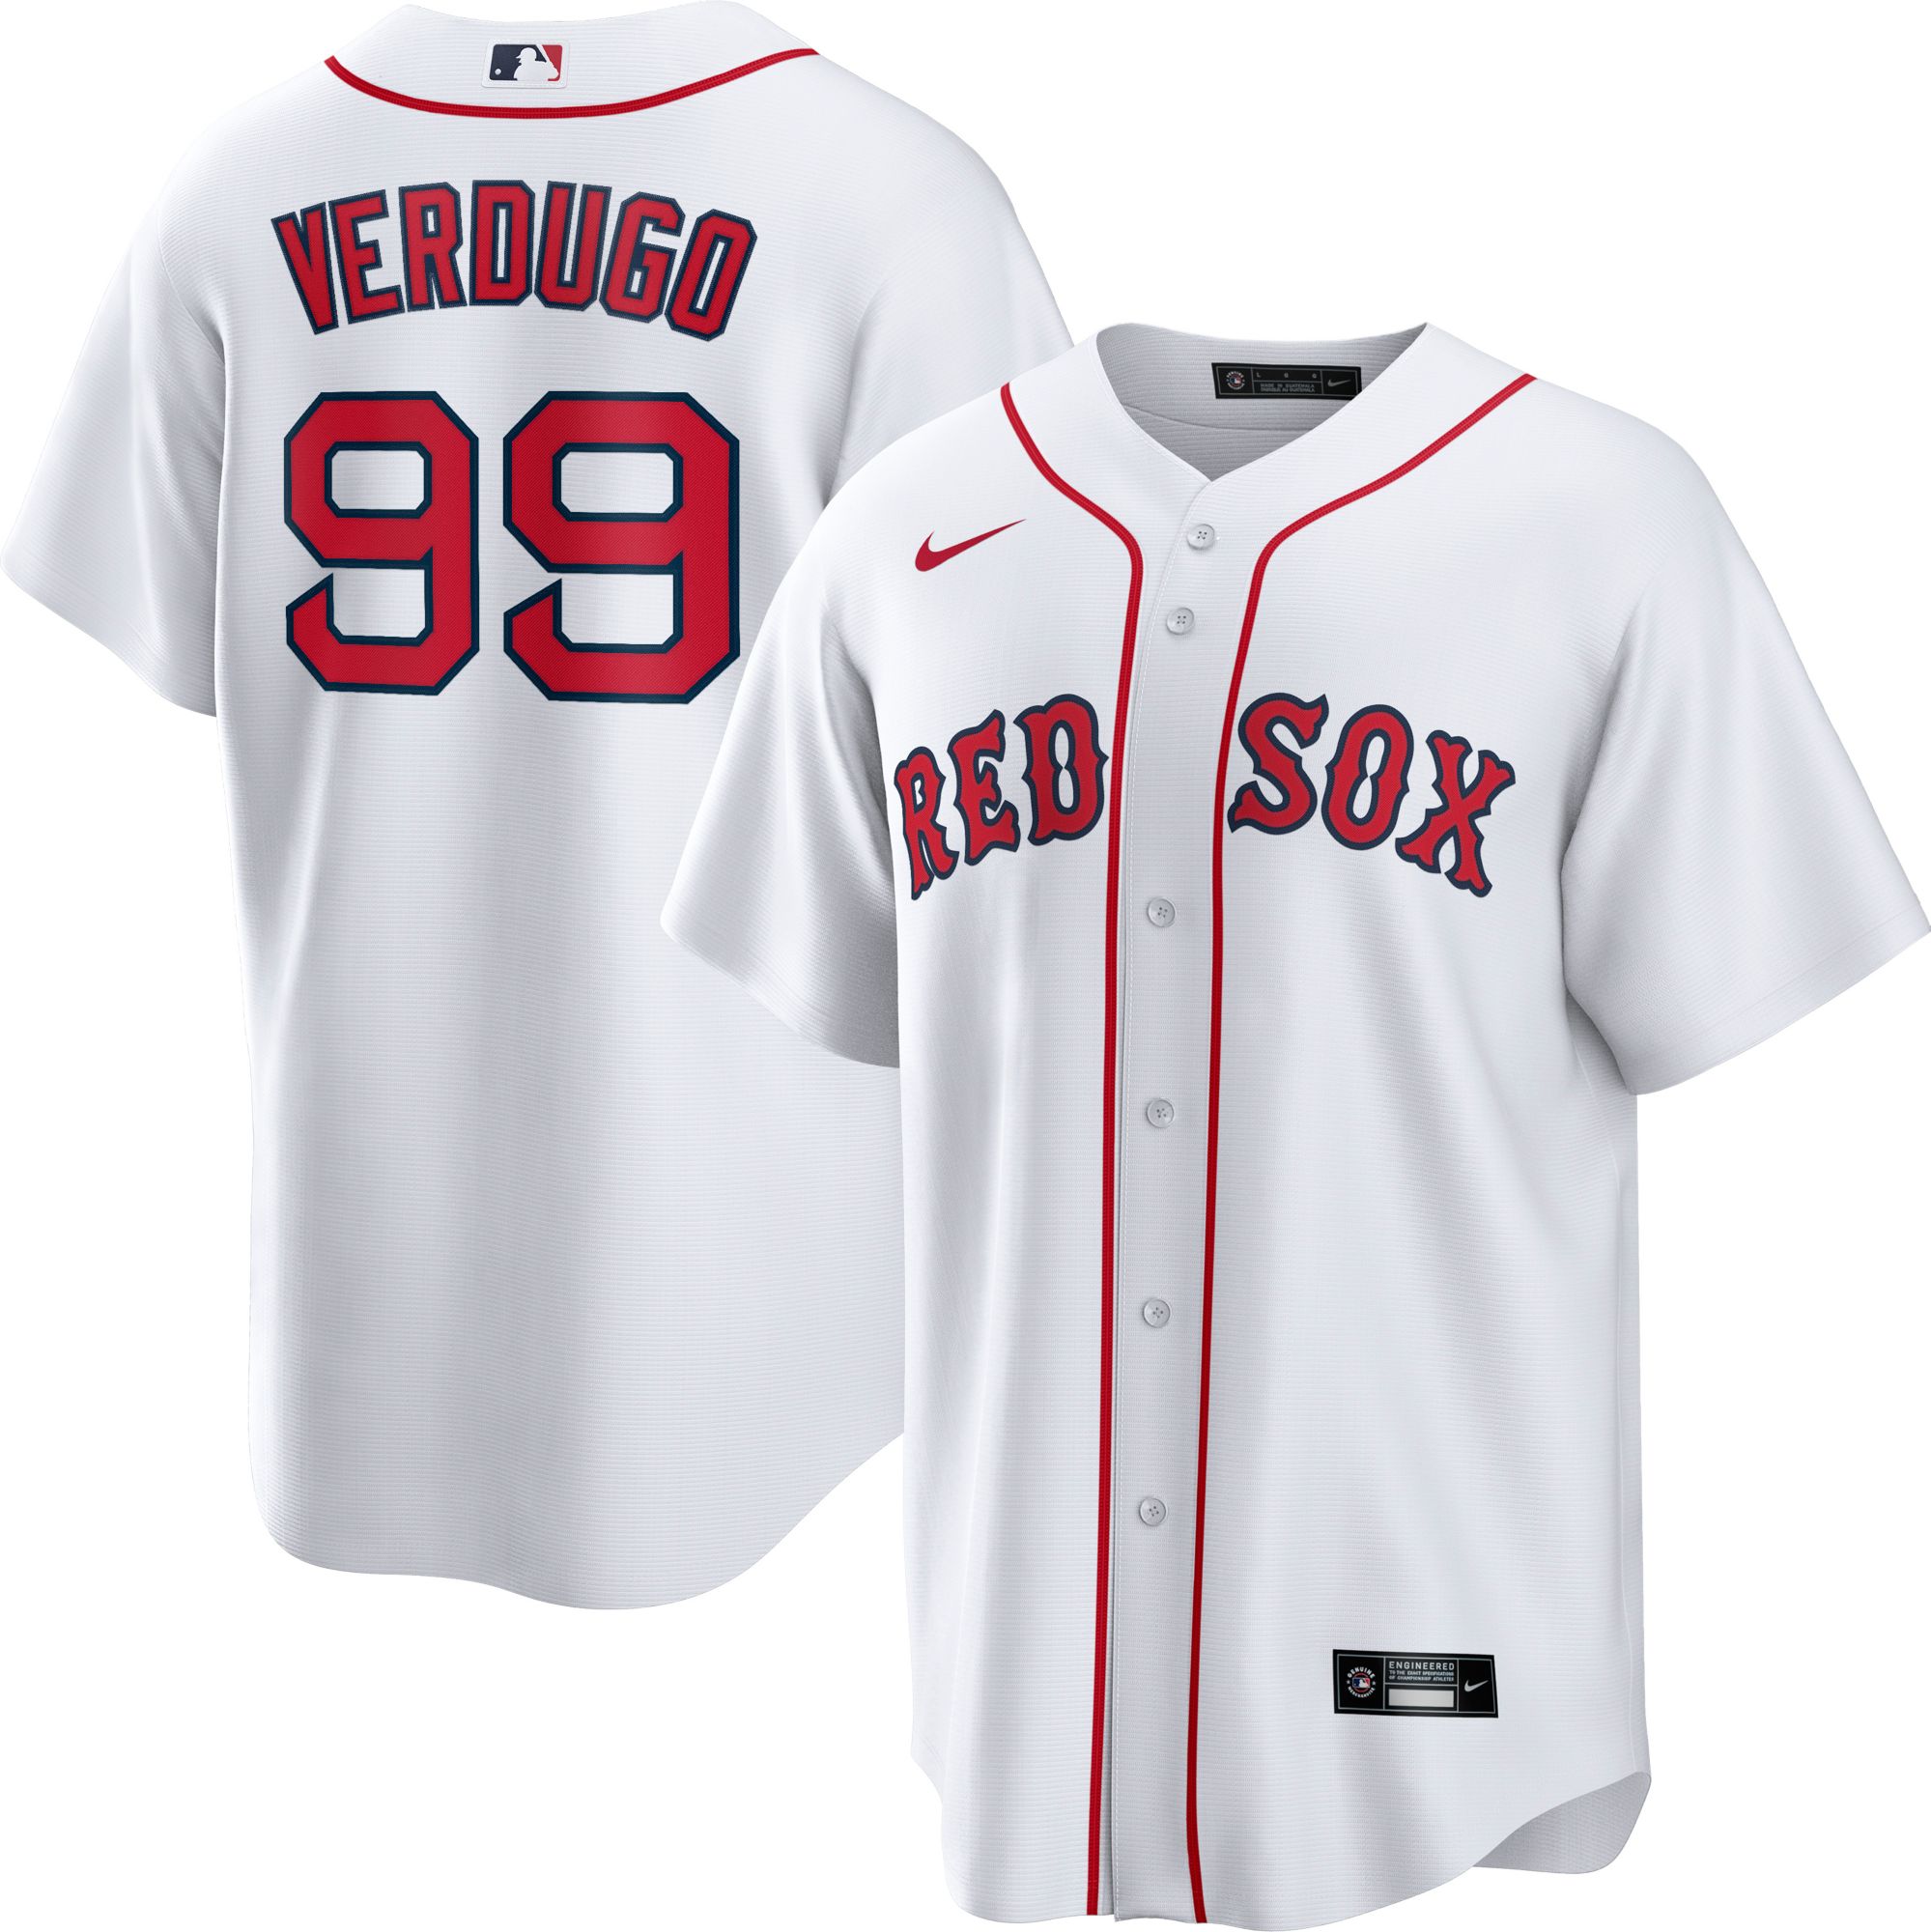 boston red sox 99 jersey